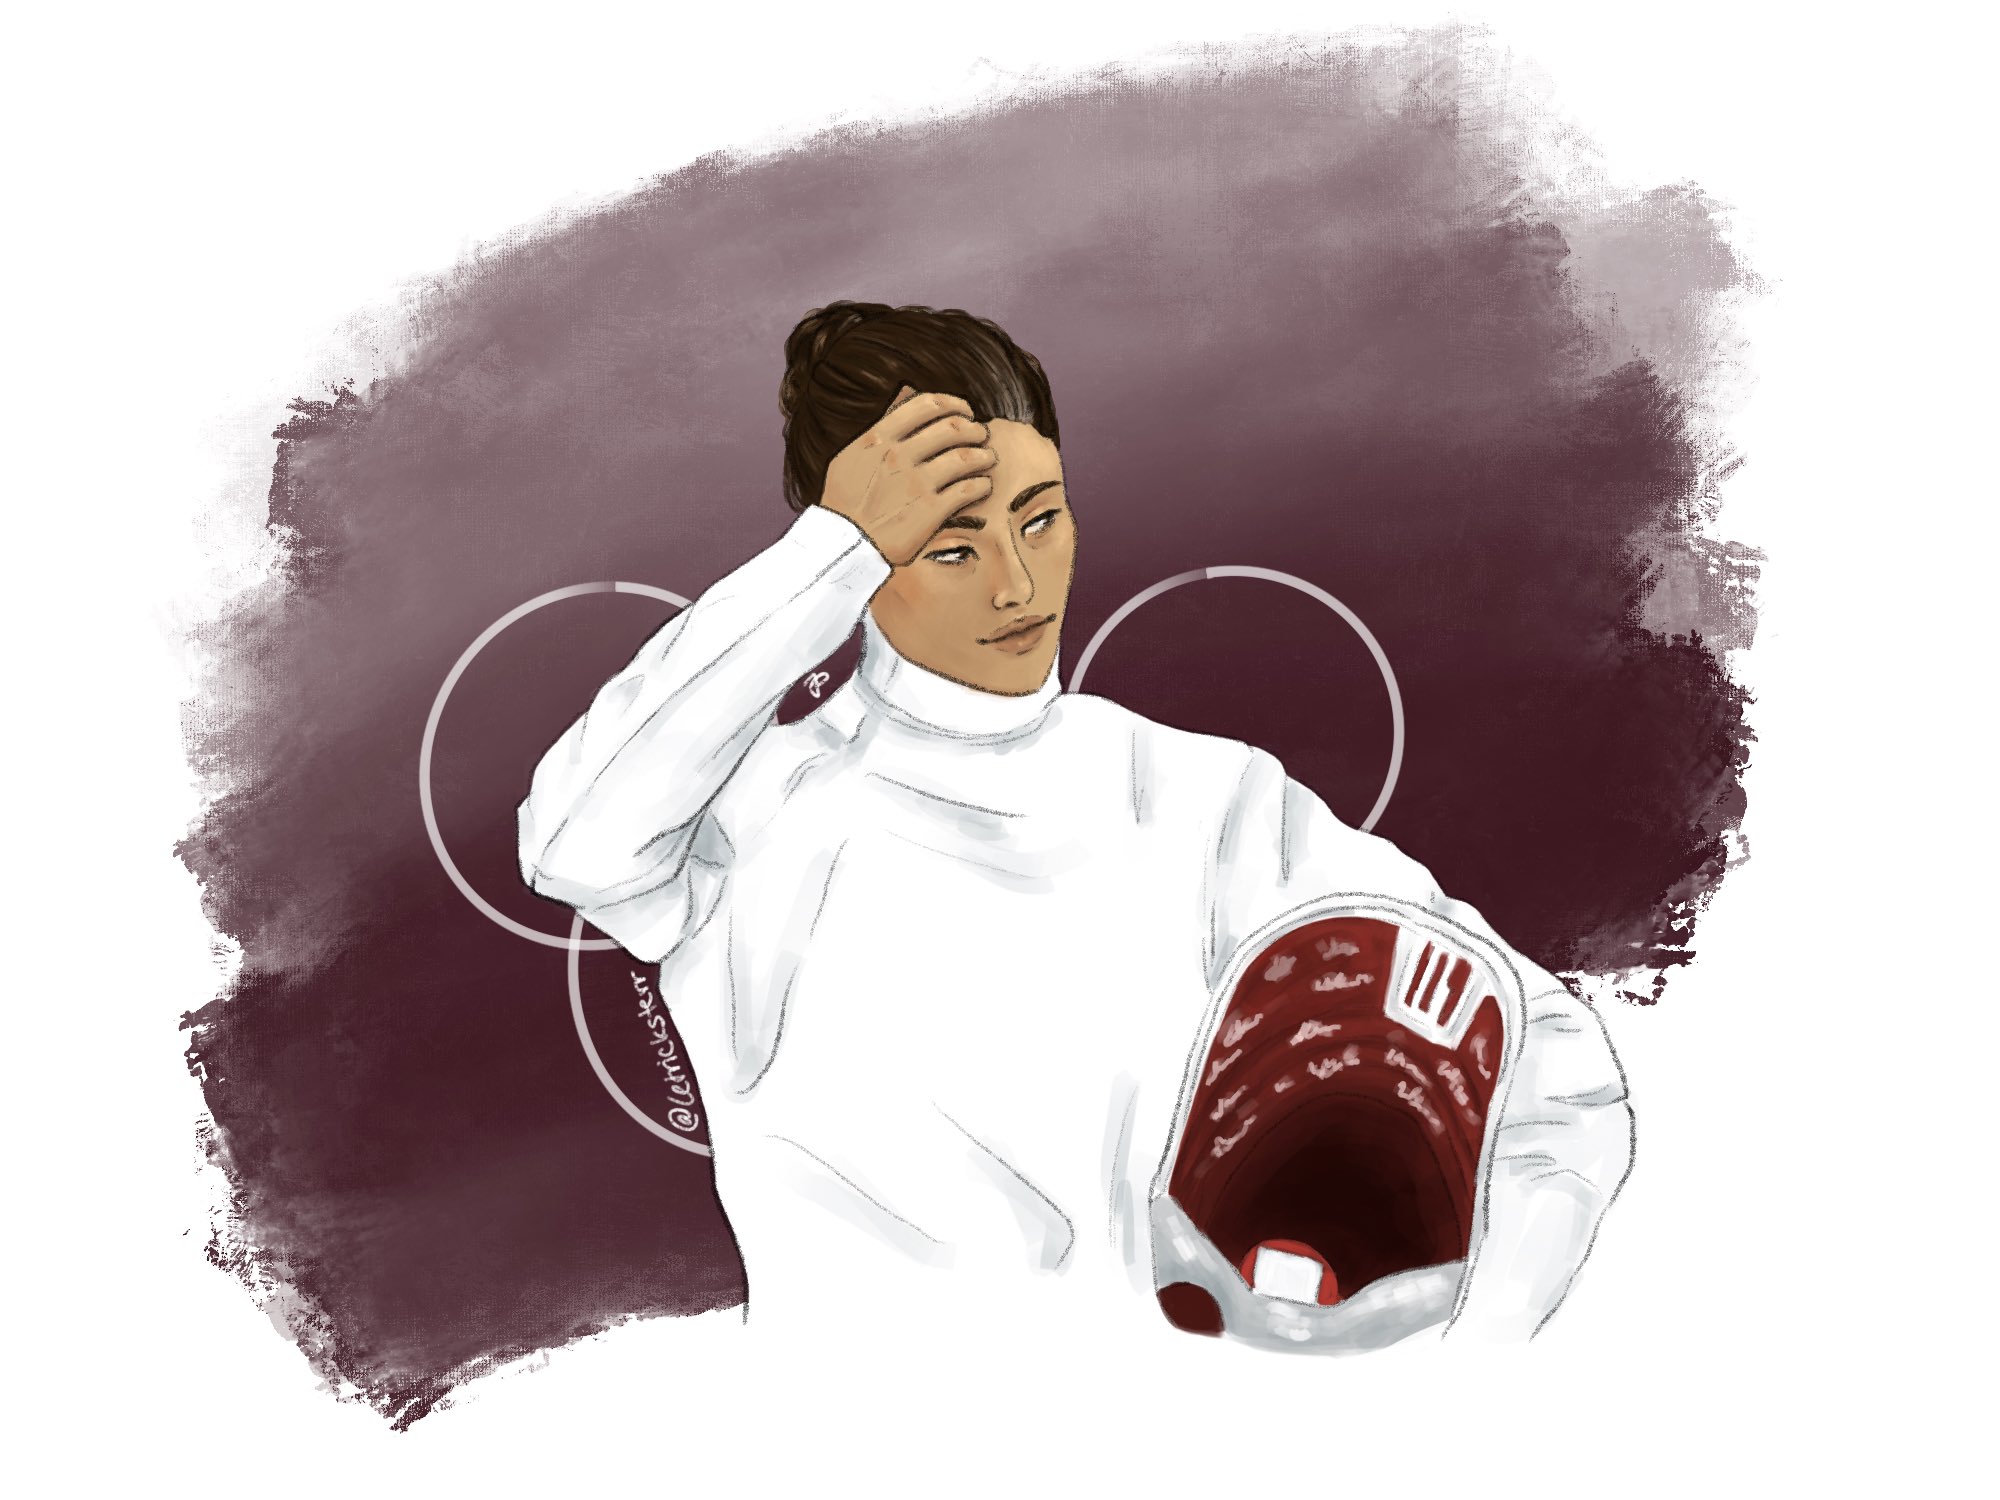 A drawing of Lin Wanyue from Female General and Eldest Princess dressed as a fencer. She is looking away from the camera and scratching her head, holding her helmet under one arm. Her dark brown hair is pulled back into a tight bun and there are streaks of grey in it. She stands in front of an Olympic logo.